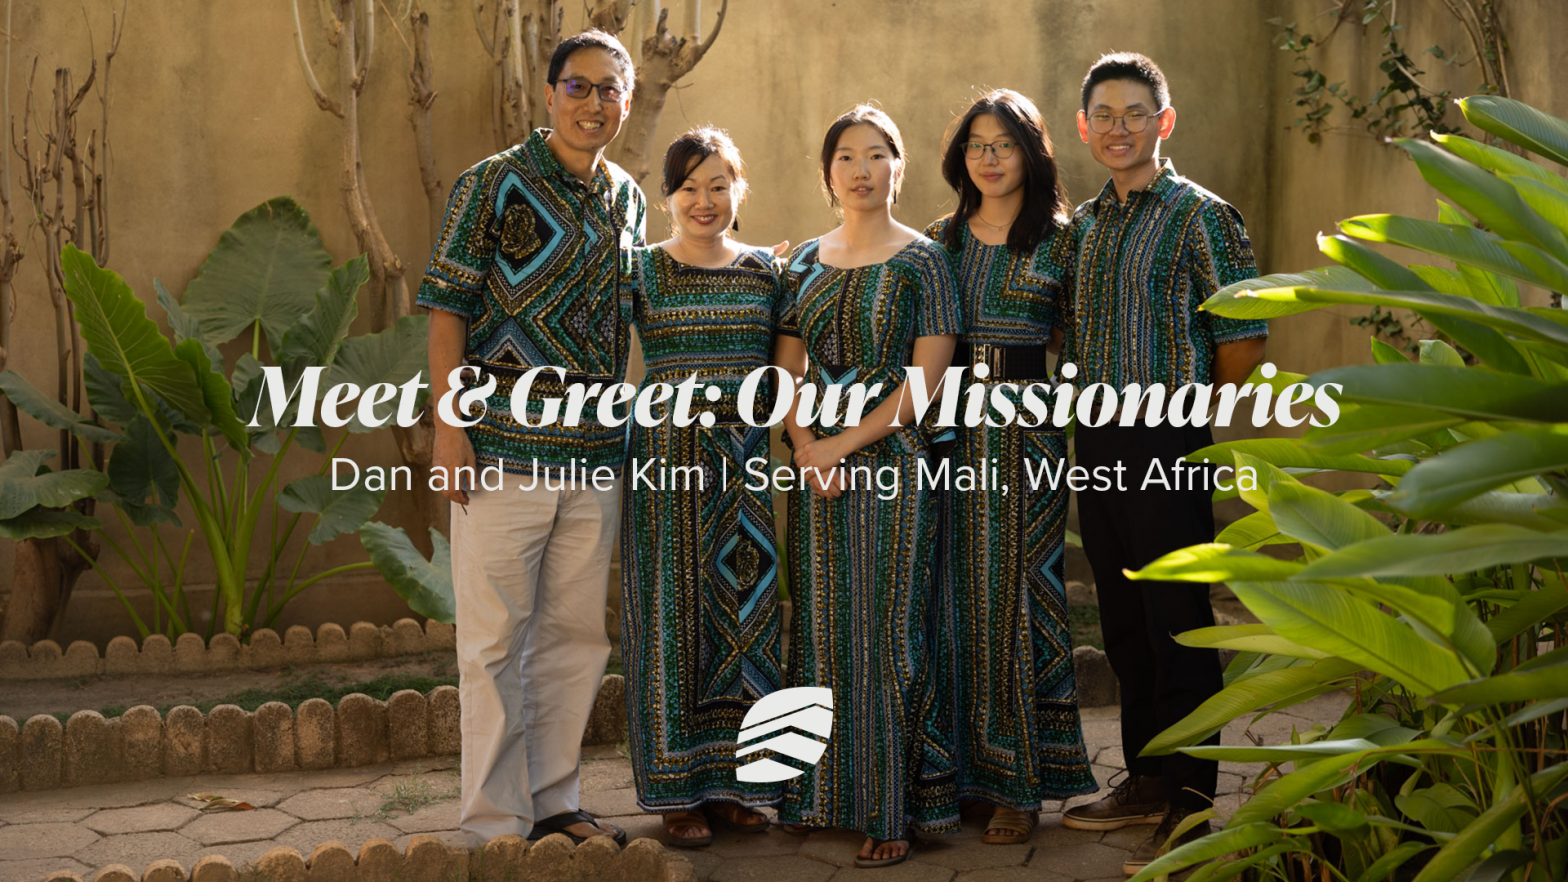 Meet & Greet: Our Missionaries event image